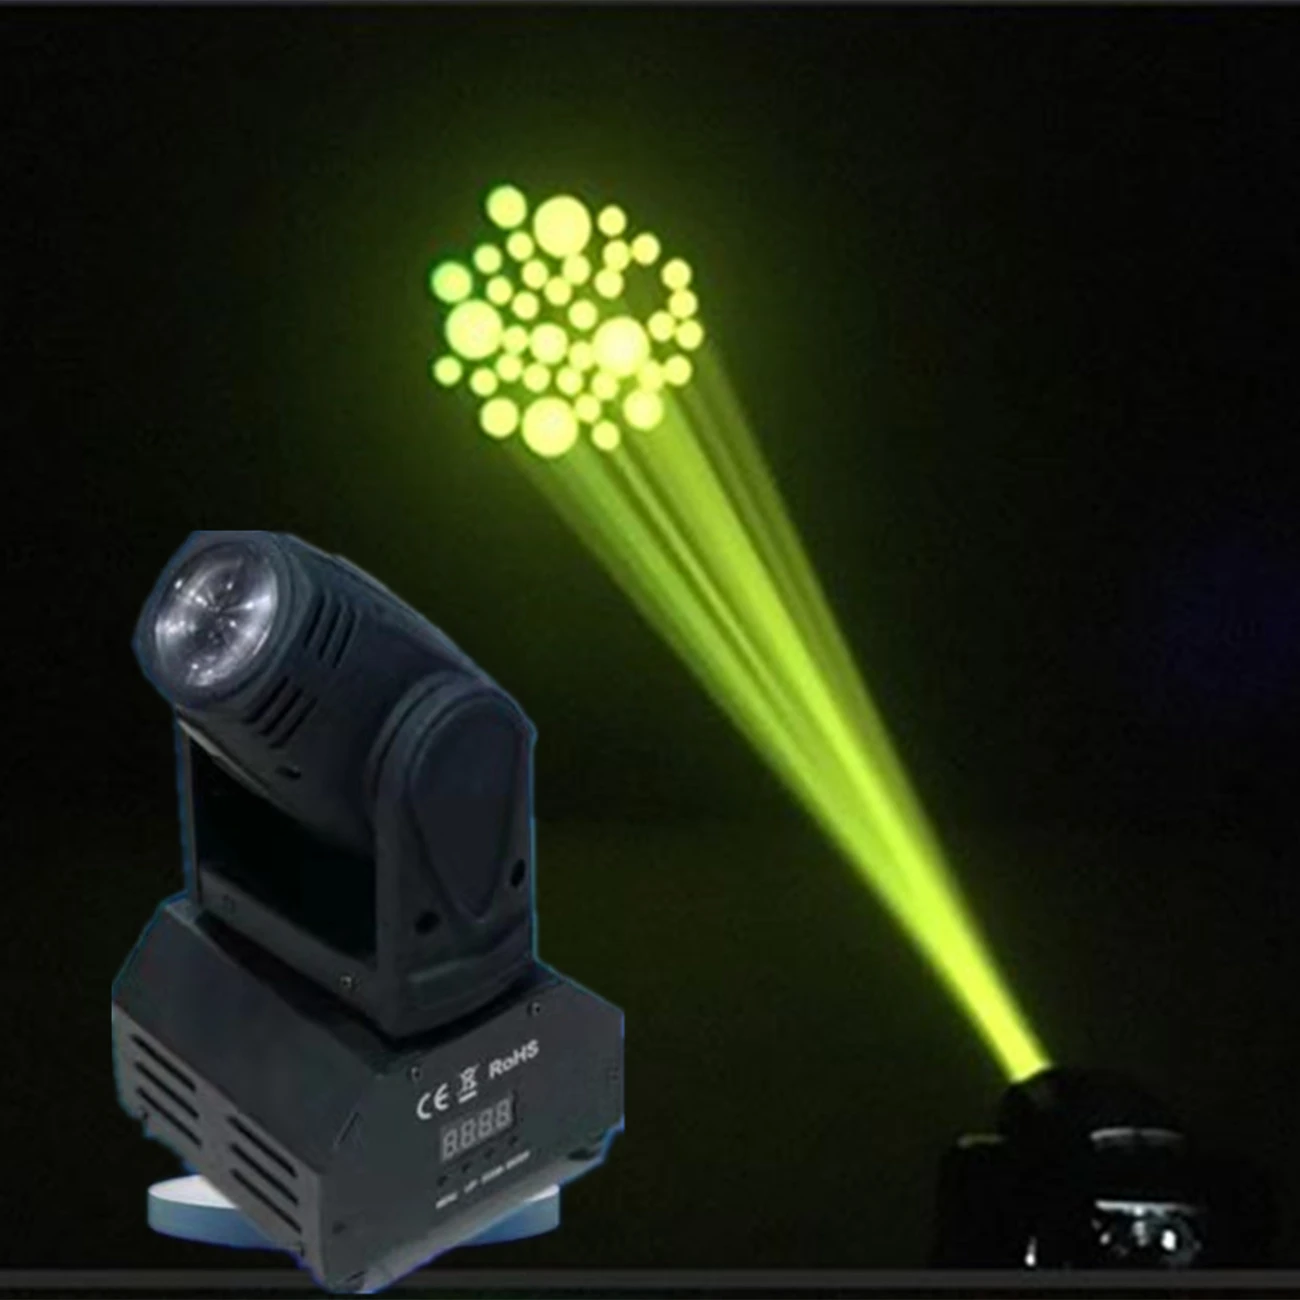 10W moving head beam pattern light stage lighting equipment, can be used for disco music parties, family gatherings, etc.